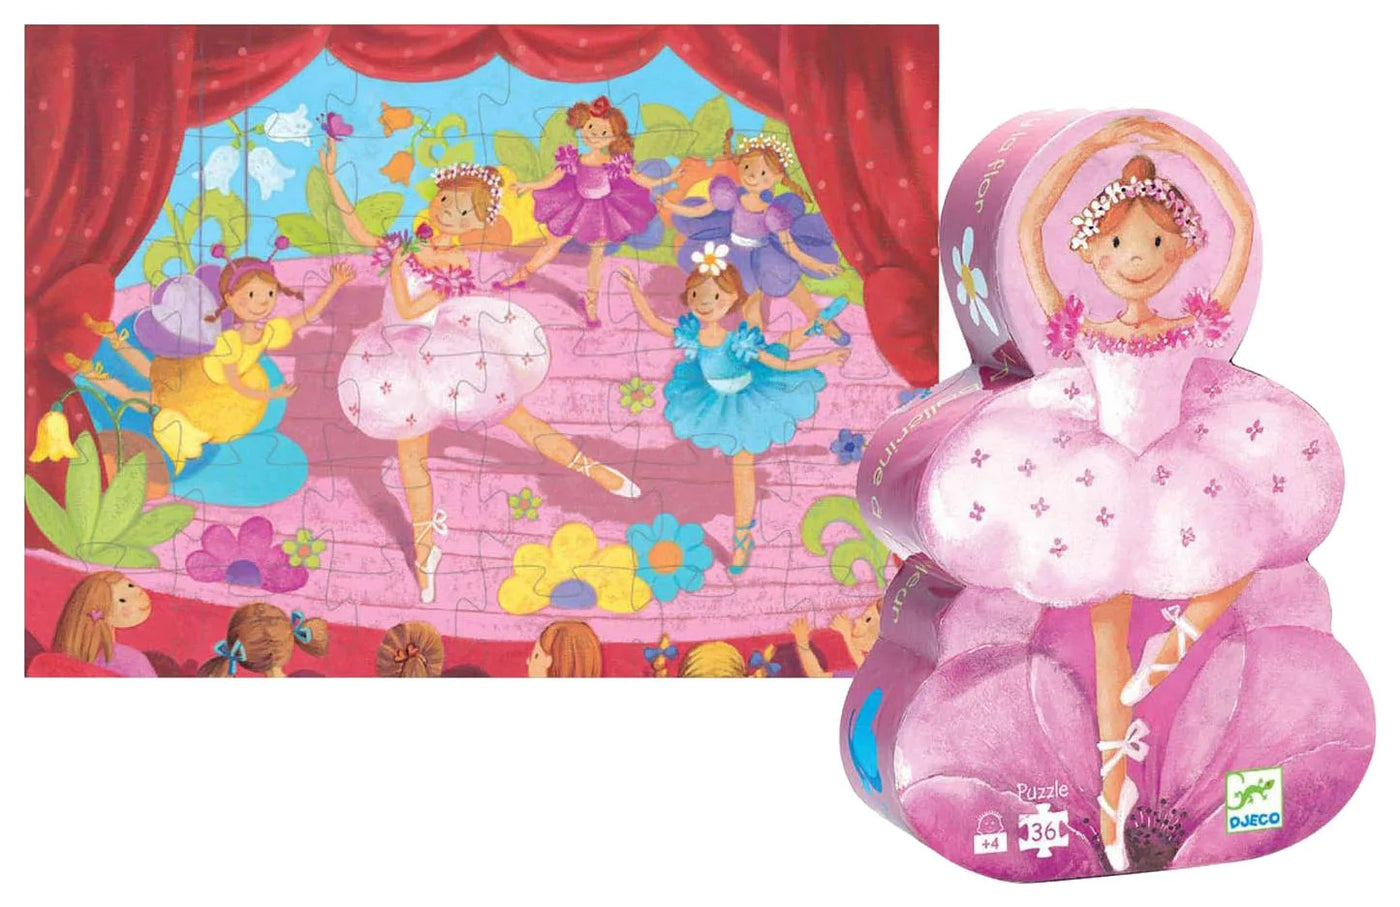 Toys And Games - Puzzles - Silhouette Puzzles The Ballerina With The Flower - 36 Pcs